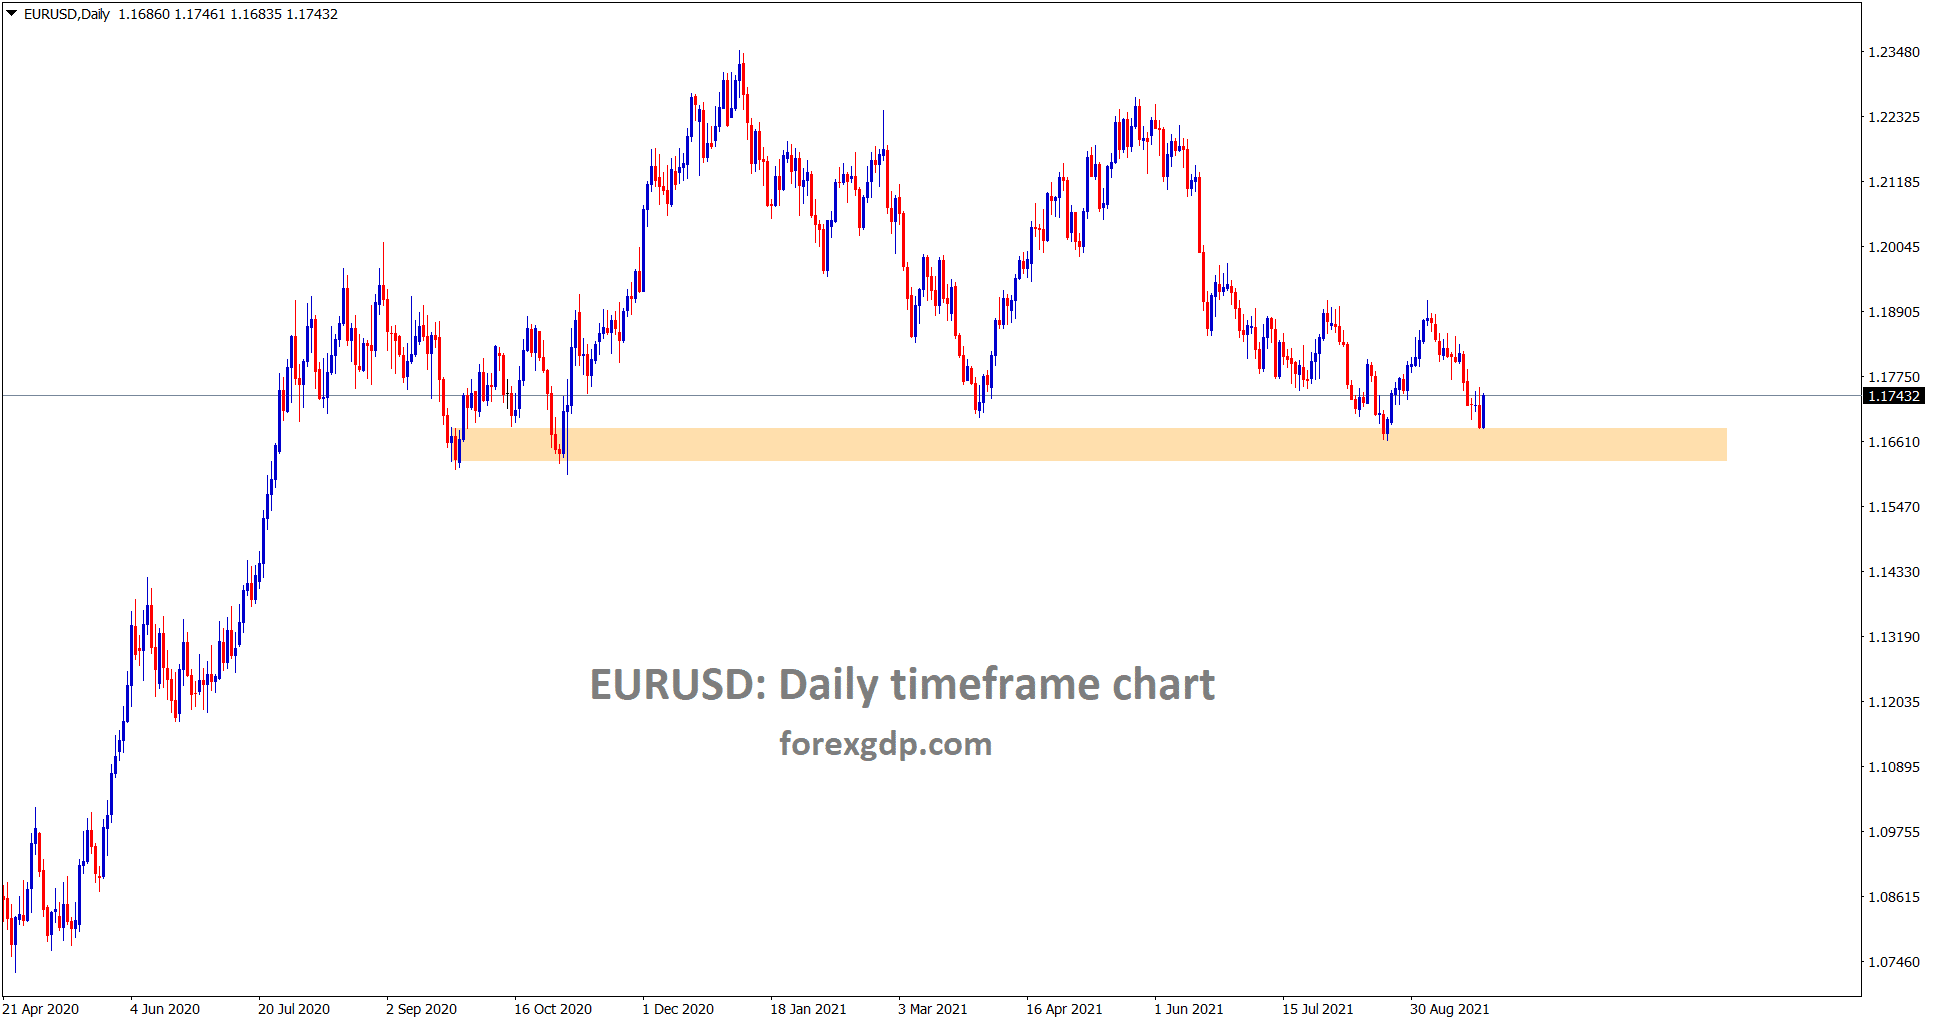 EURUSD is still standing at the major support area in the daily timeframe